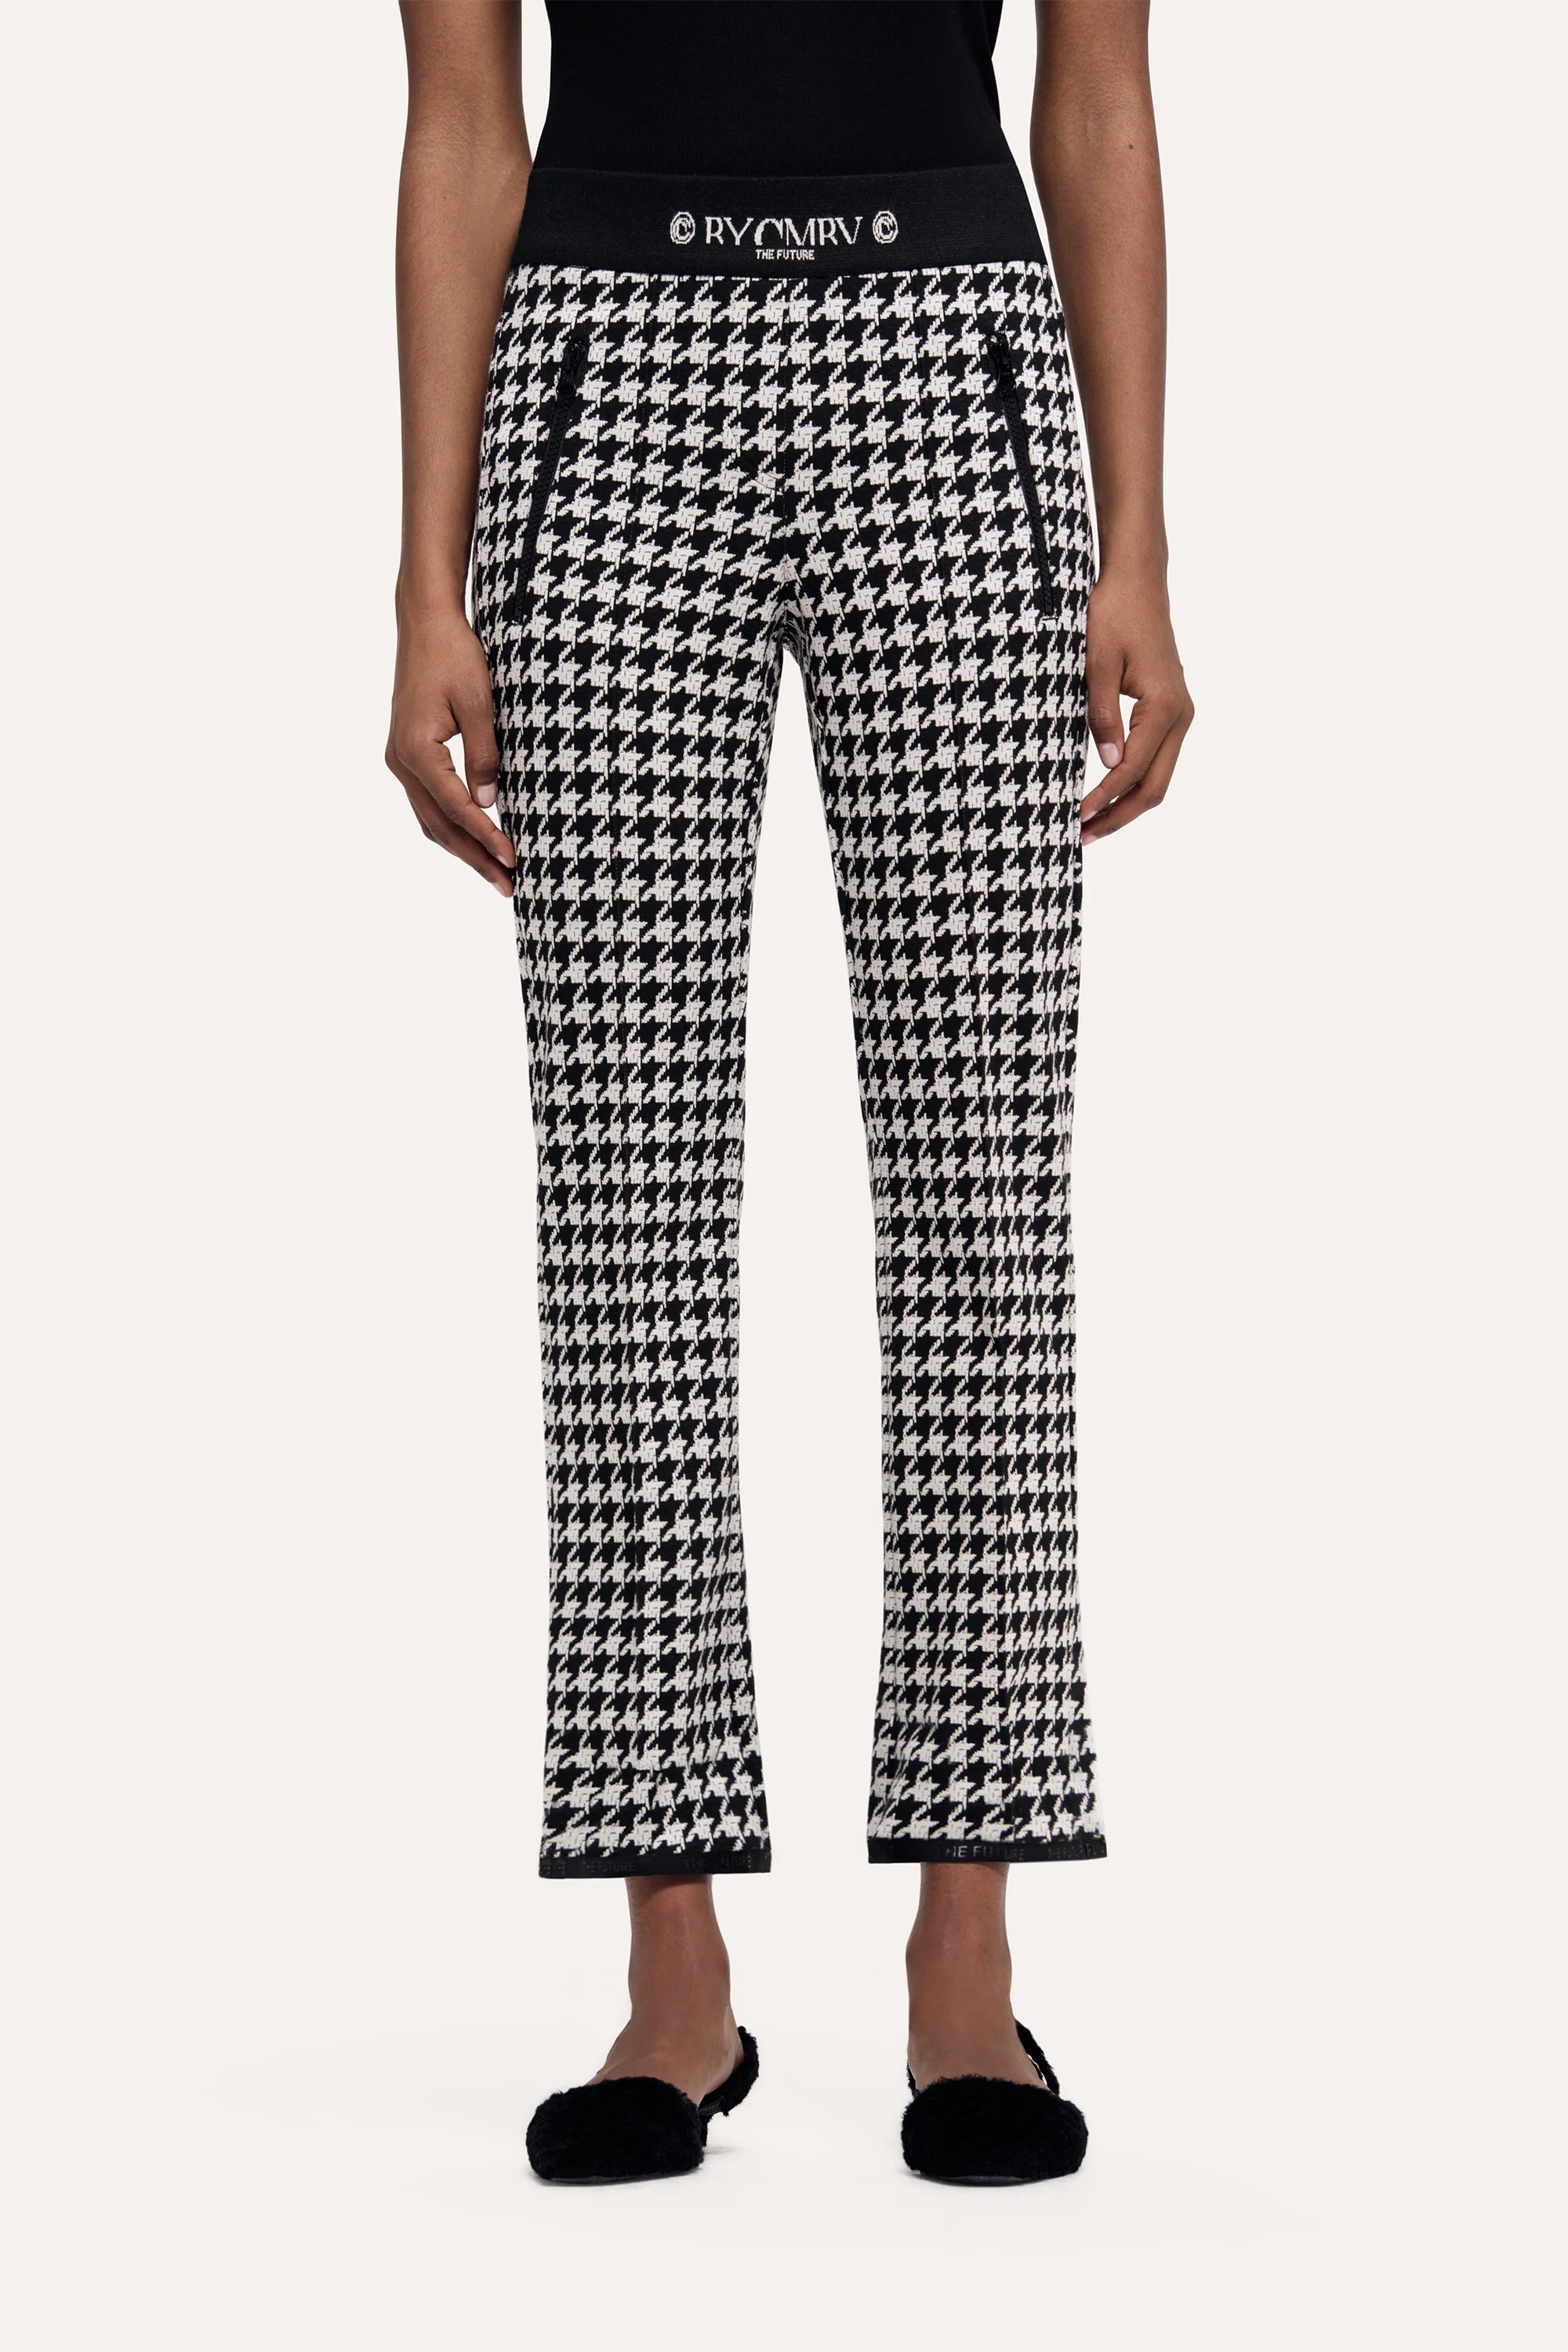 CAMBIO RANEE SLIM FIT TROUSERS WITH FLARED LEG